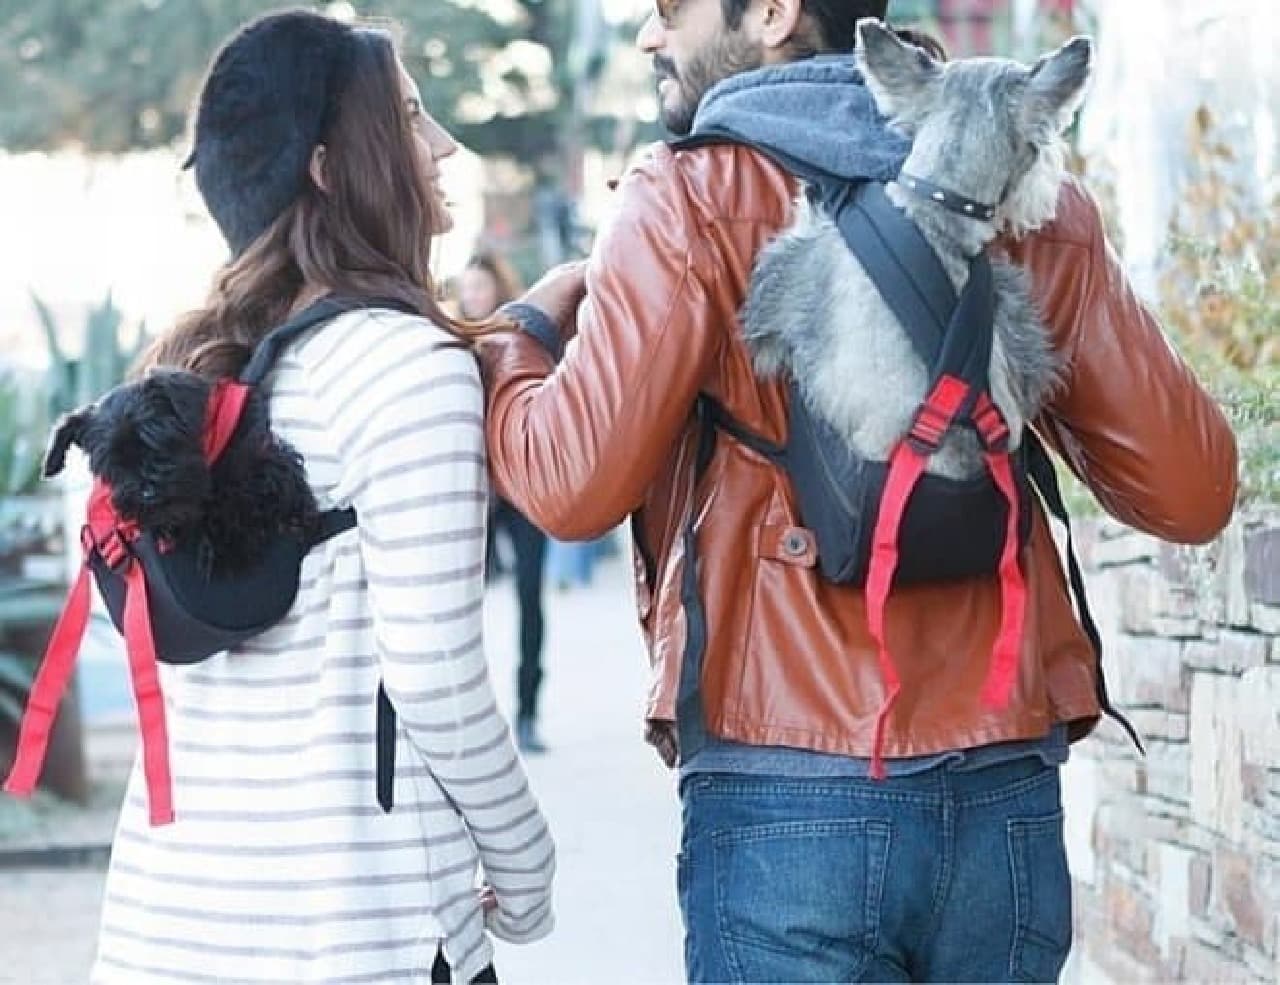 In "RUFFIT DOG CARRIER", face the same direction as the owner,